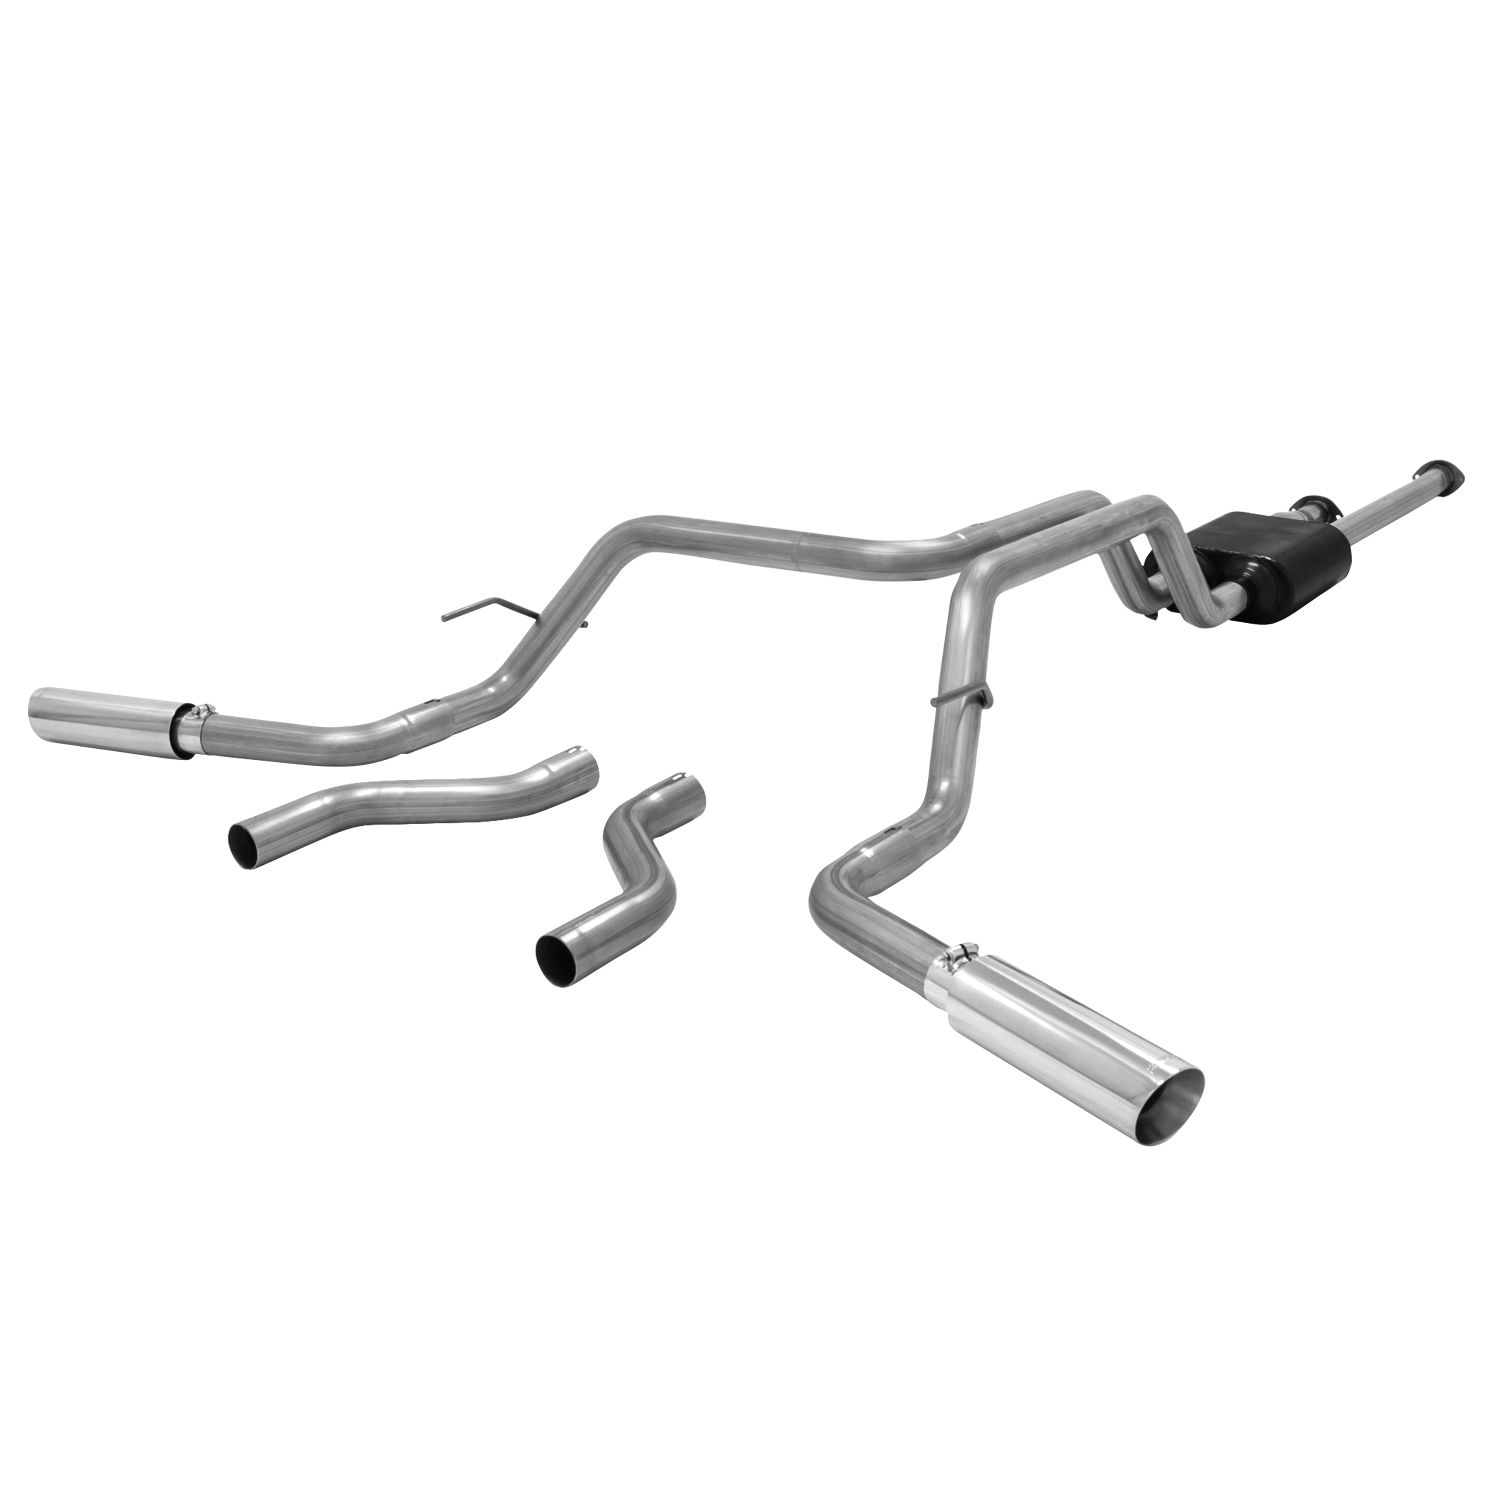 2015 Toyota Tundra TRD Pro 5.7L Flowmaster American Thunder Cat-Back Exhaust - 817664